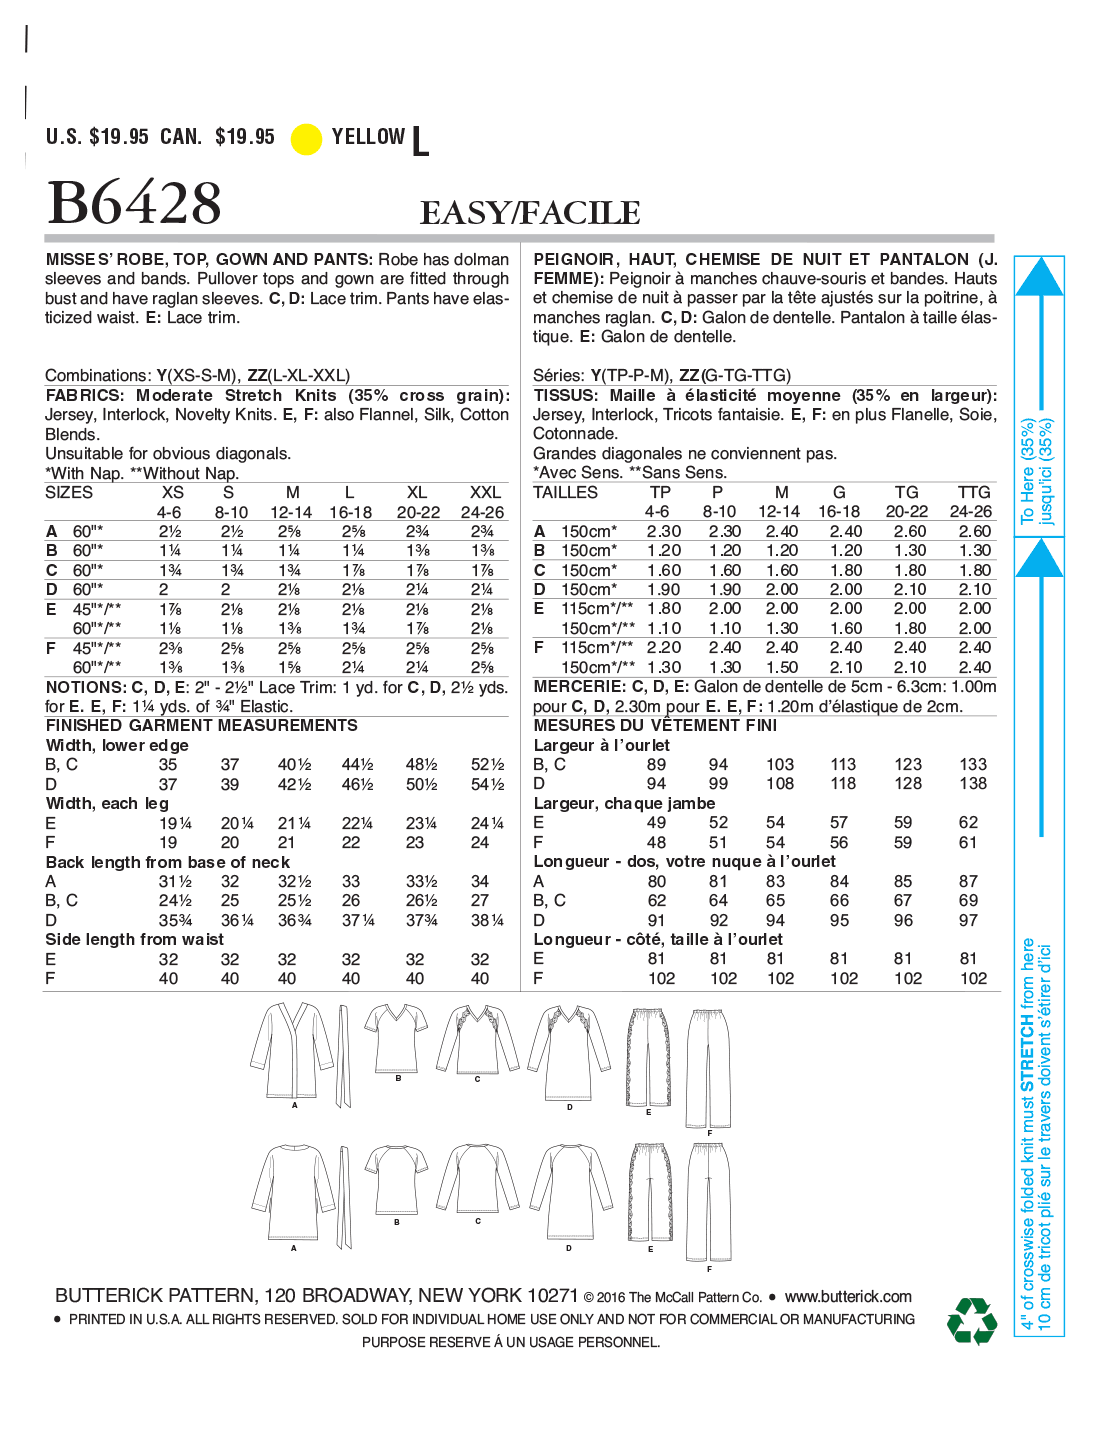 Butterick B6428 Misses' Robe, Raglan Sleeve Tops and Gown, and Pull-On Pants